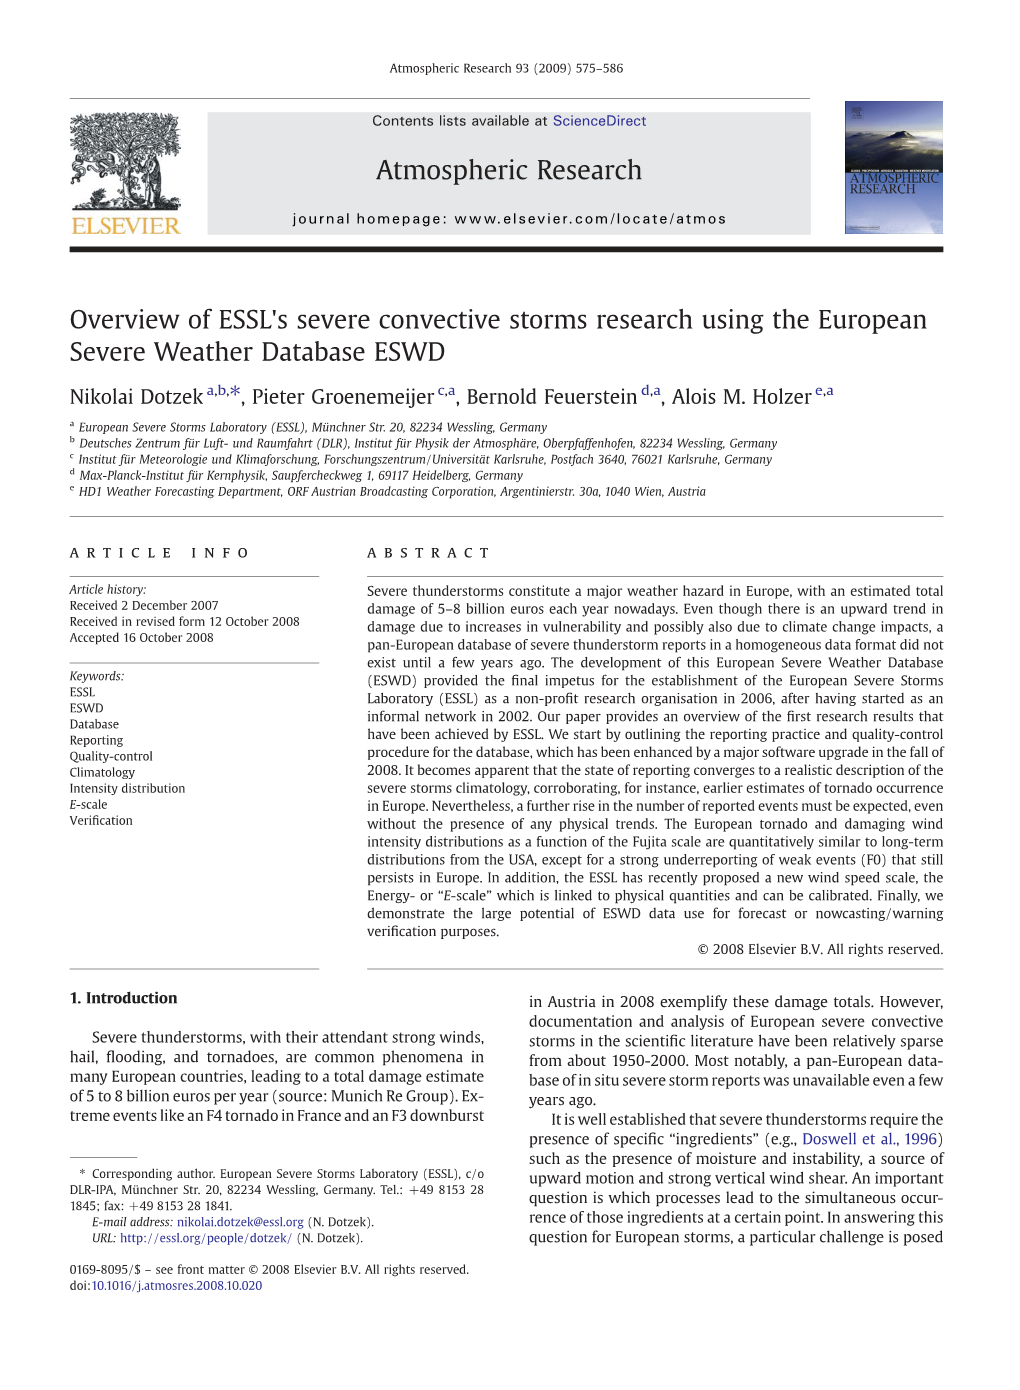 Overview of ESSL's Severe Convective Storms Research Using the European Severe Weather Database ESWD